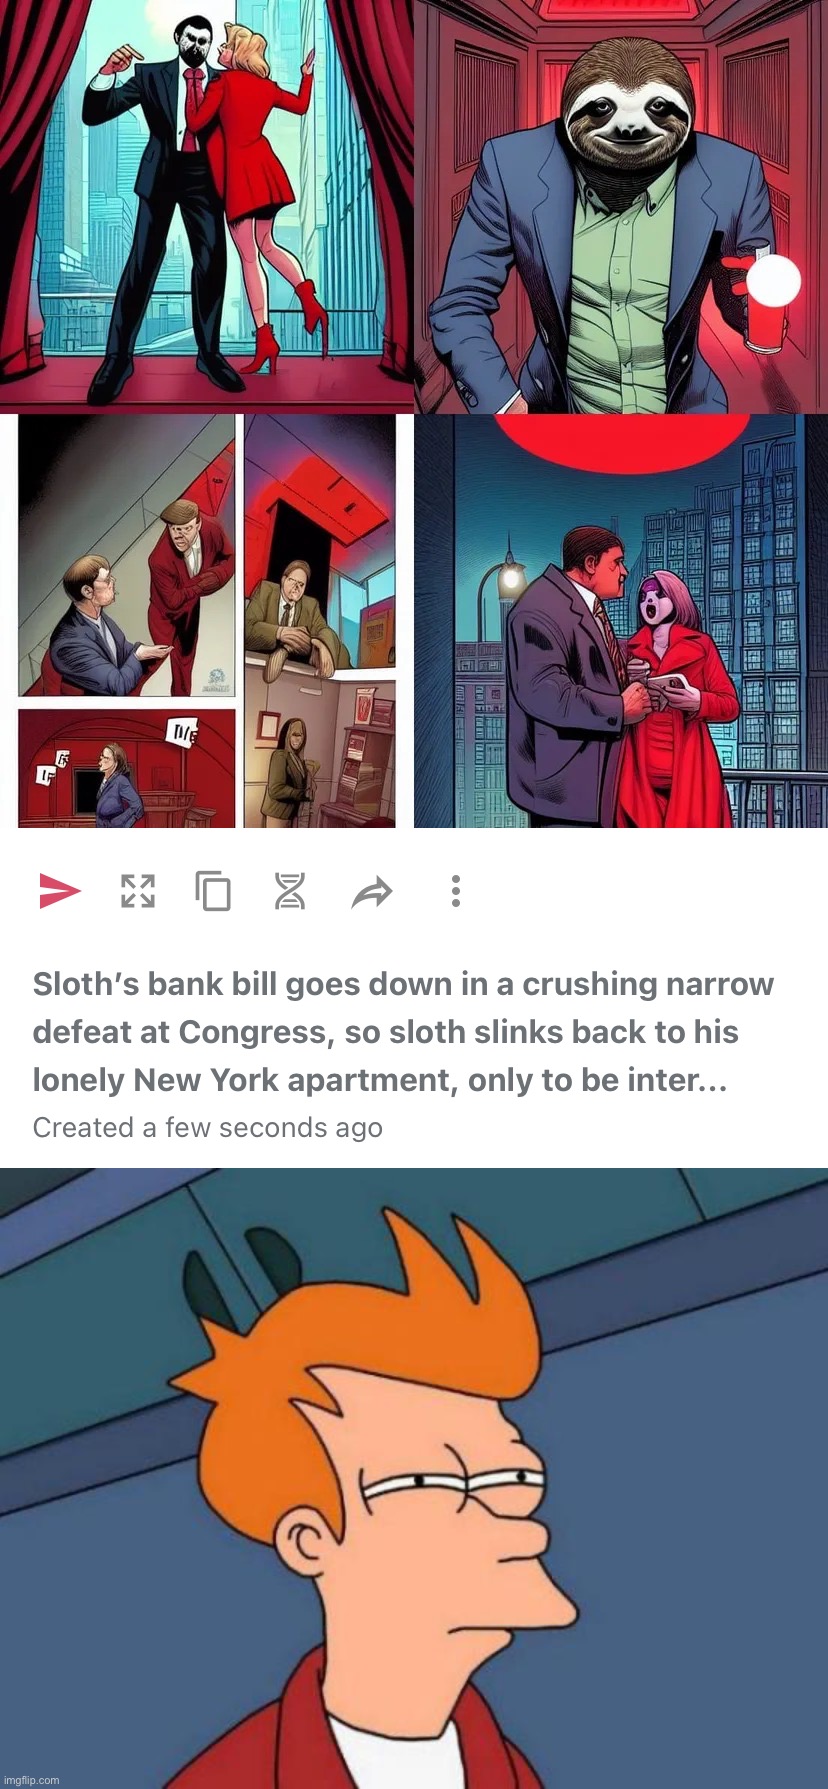 …cepted by a mysterious woman in red who is down on her luck. Not sure if I’ve seen this movie before | image tagged in sloth s bank bill goes down in a crushing narrow defeat at congr,memes,futurama fry,sloth,bank bill,out-of-place futurama fry | made w/ Imgflip meme maker